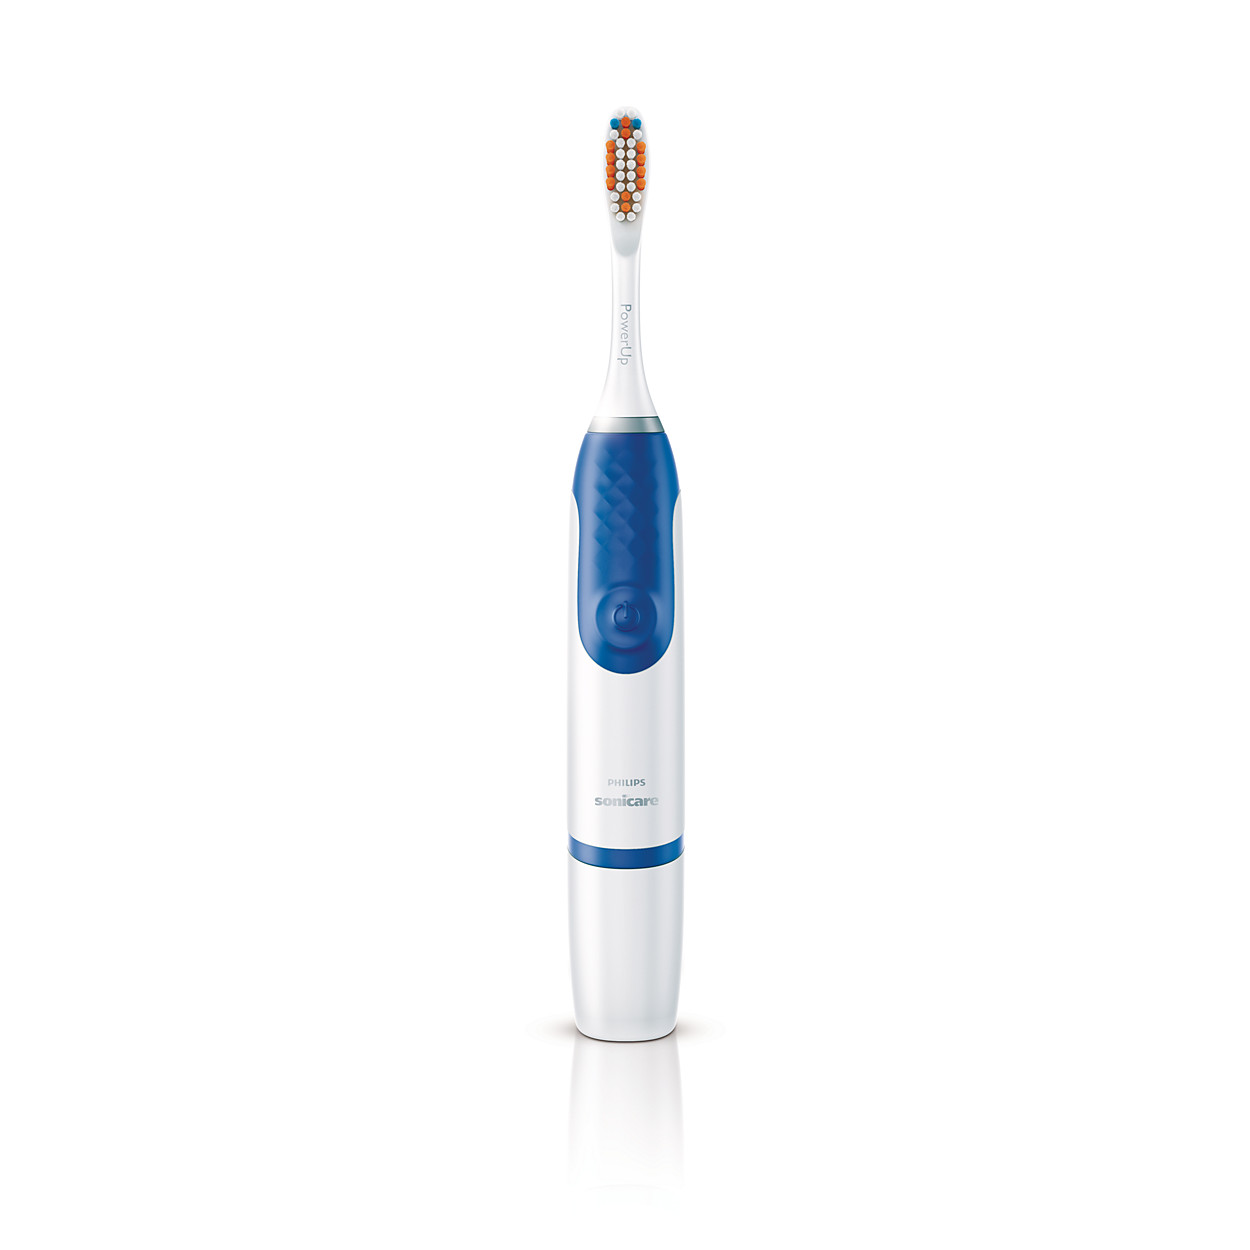 Buy the Sonicare PowerUp Battery Sonicare toothbrush HX3631/02